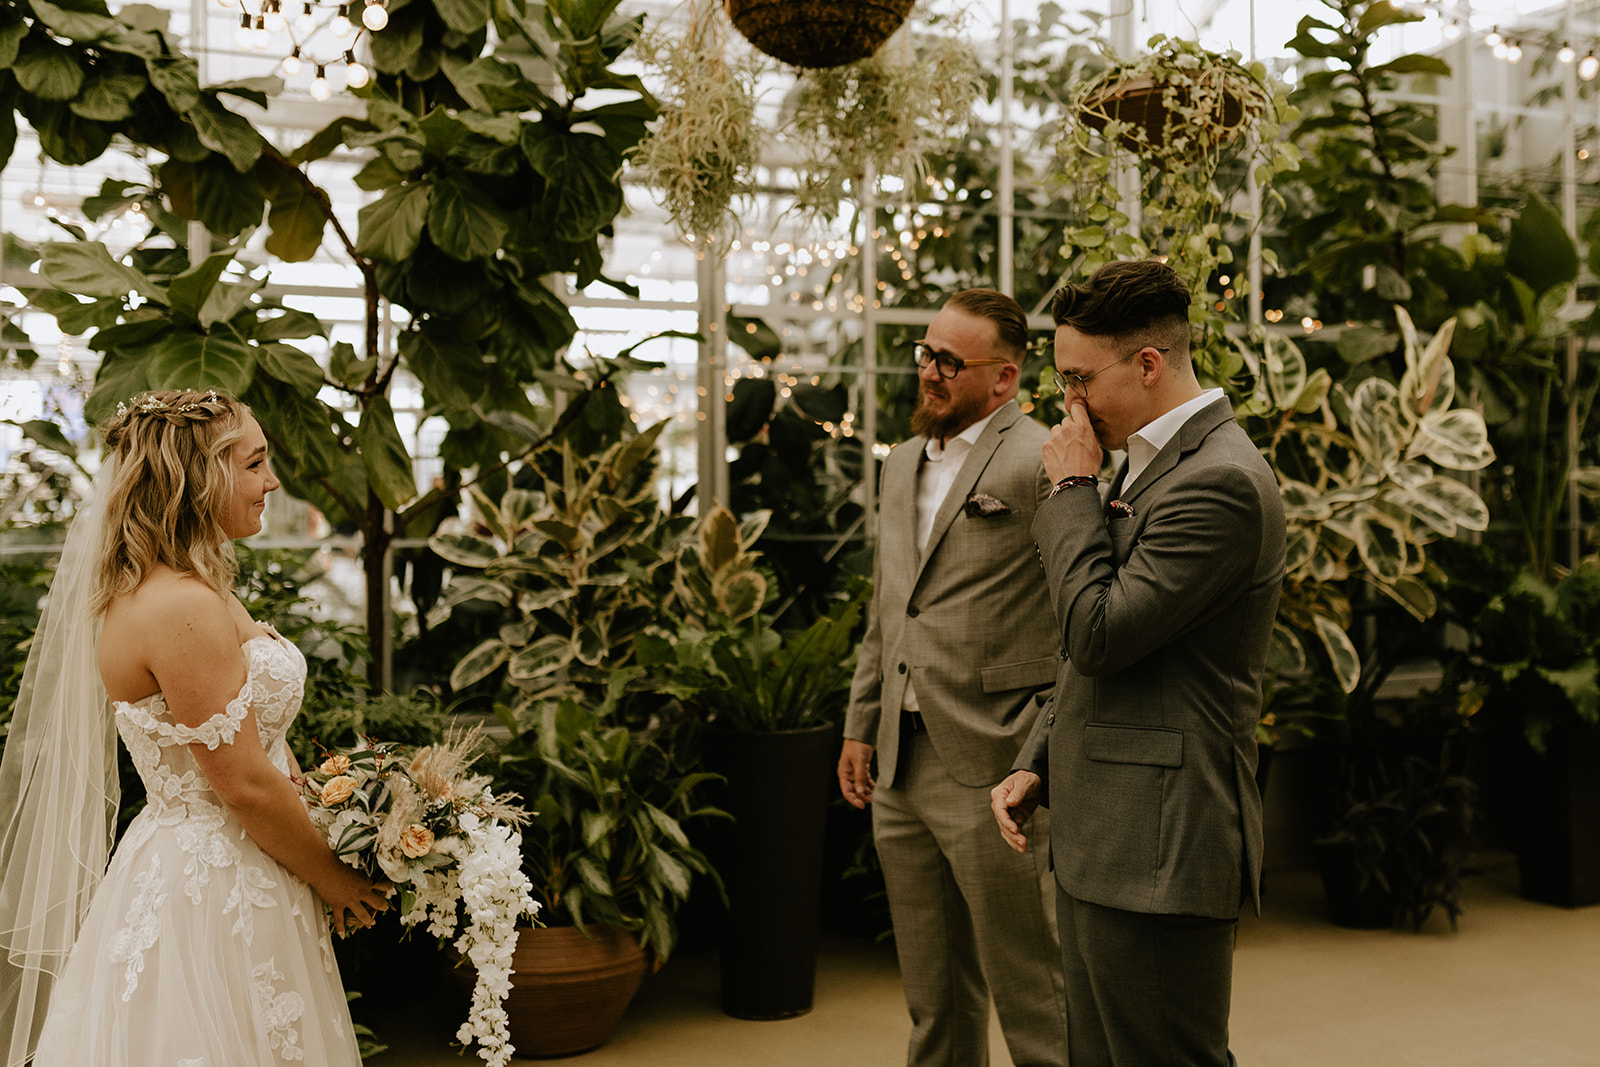 A couple getting married at the Downtown Market greenhouse in Grand Rapids, Michigan